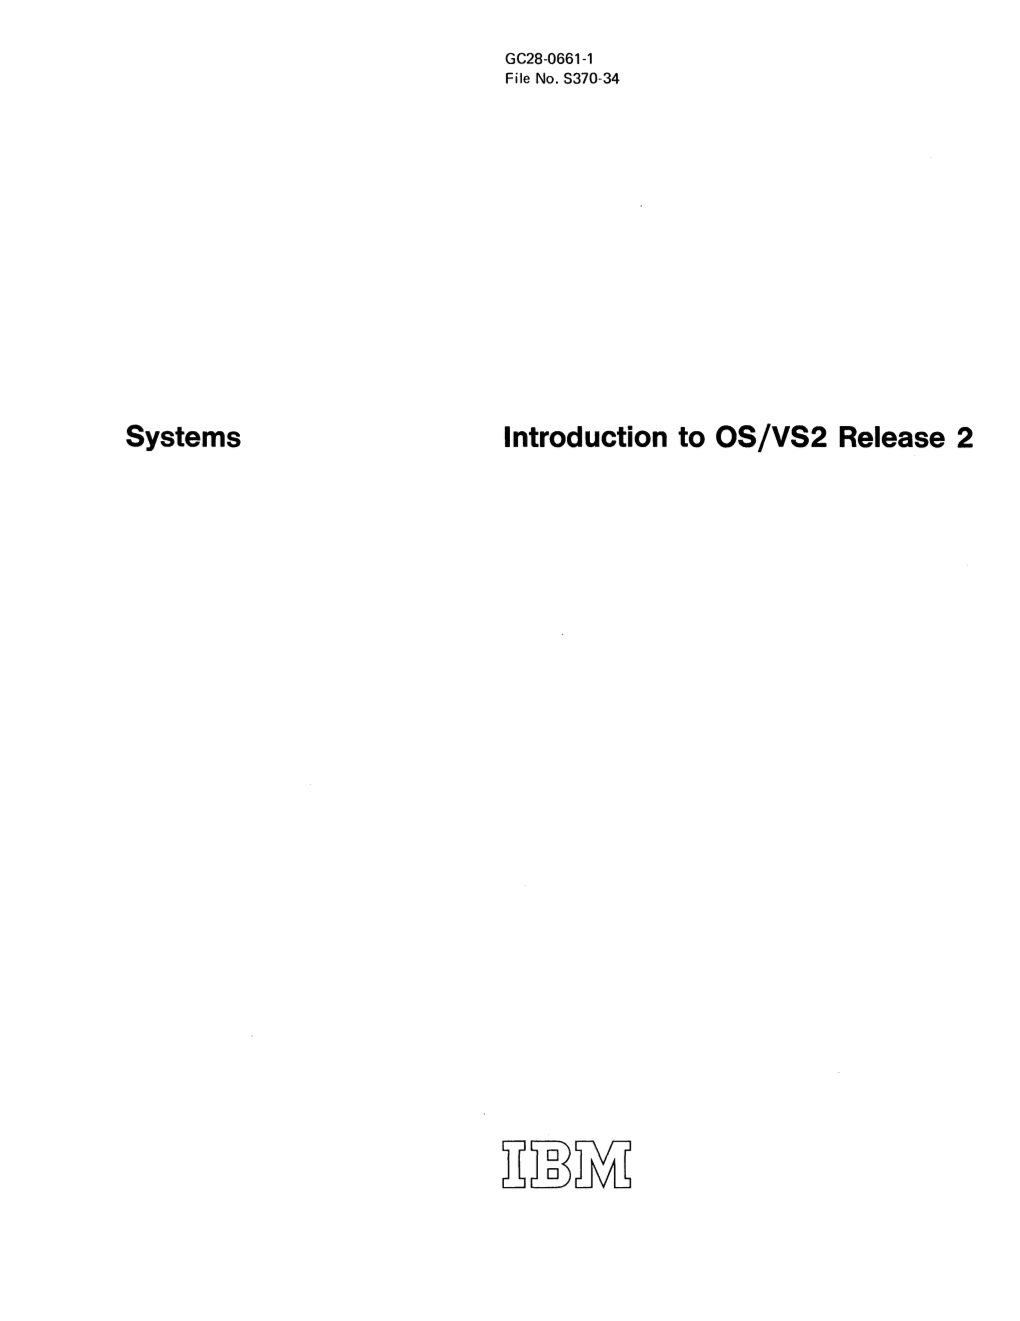 Systems Introduction to OS/VS2 Release 2 First Edition (March, 1973)